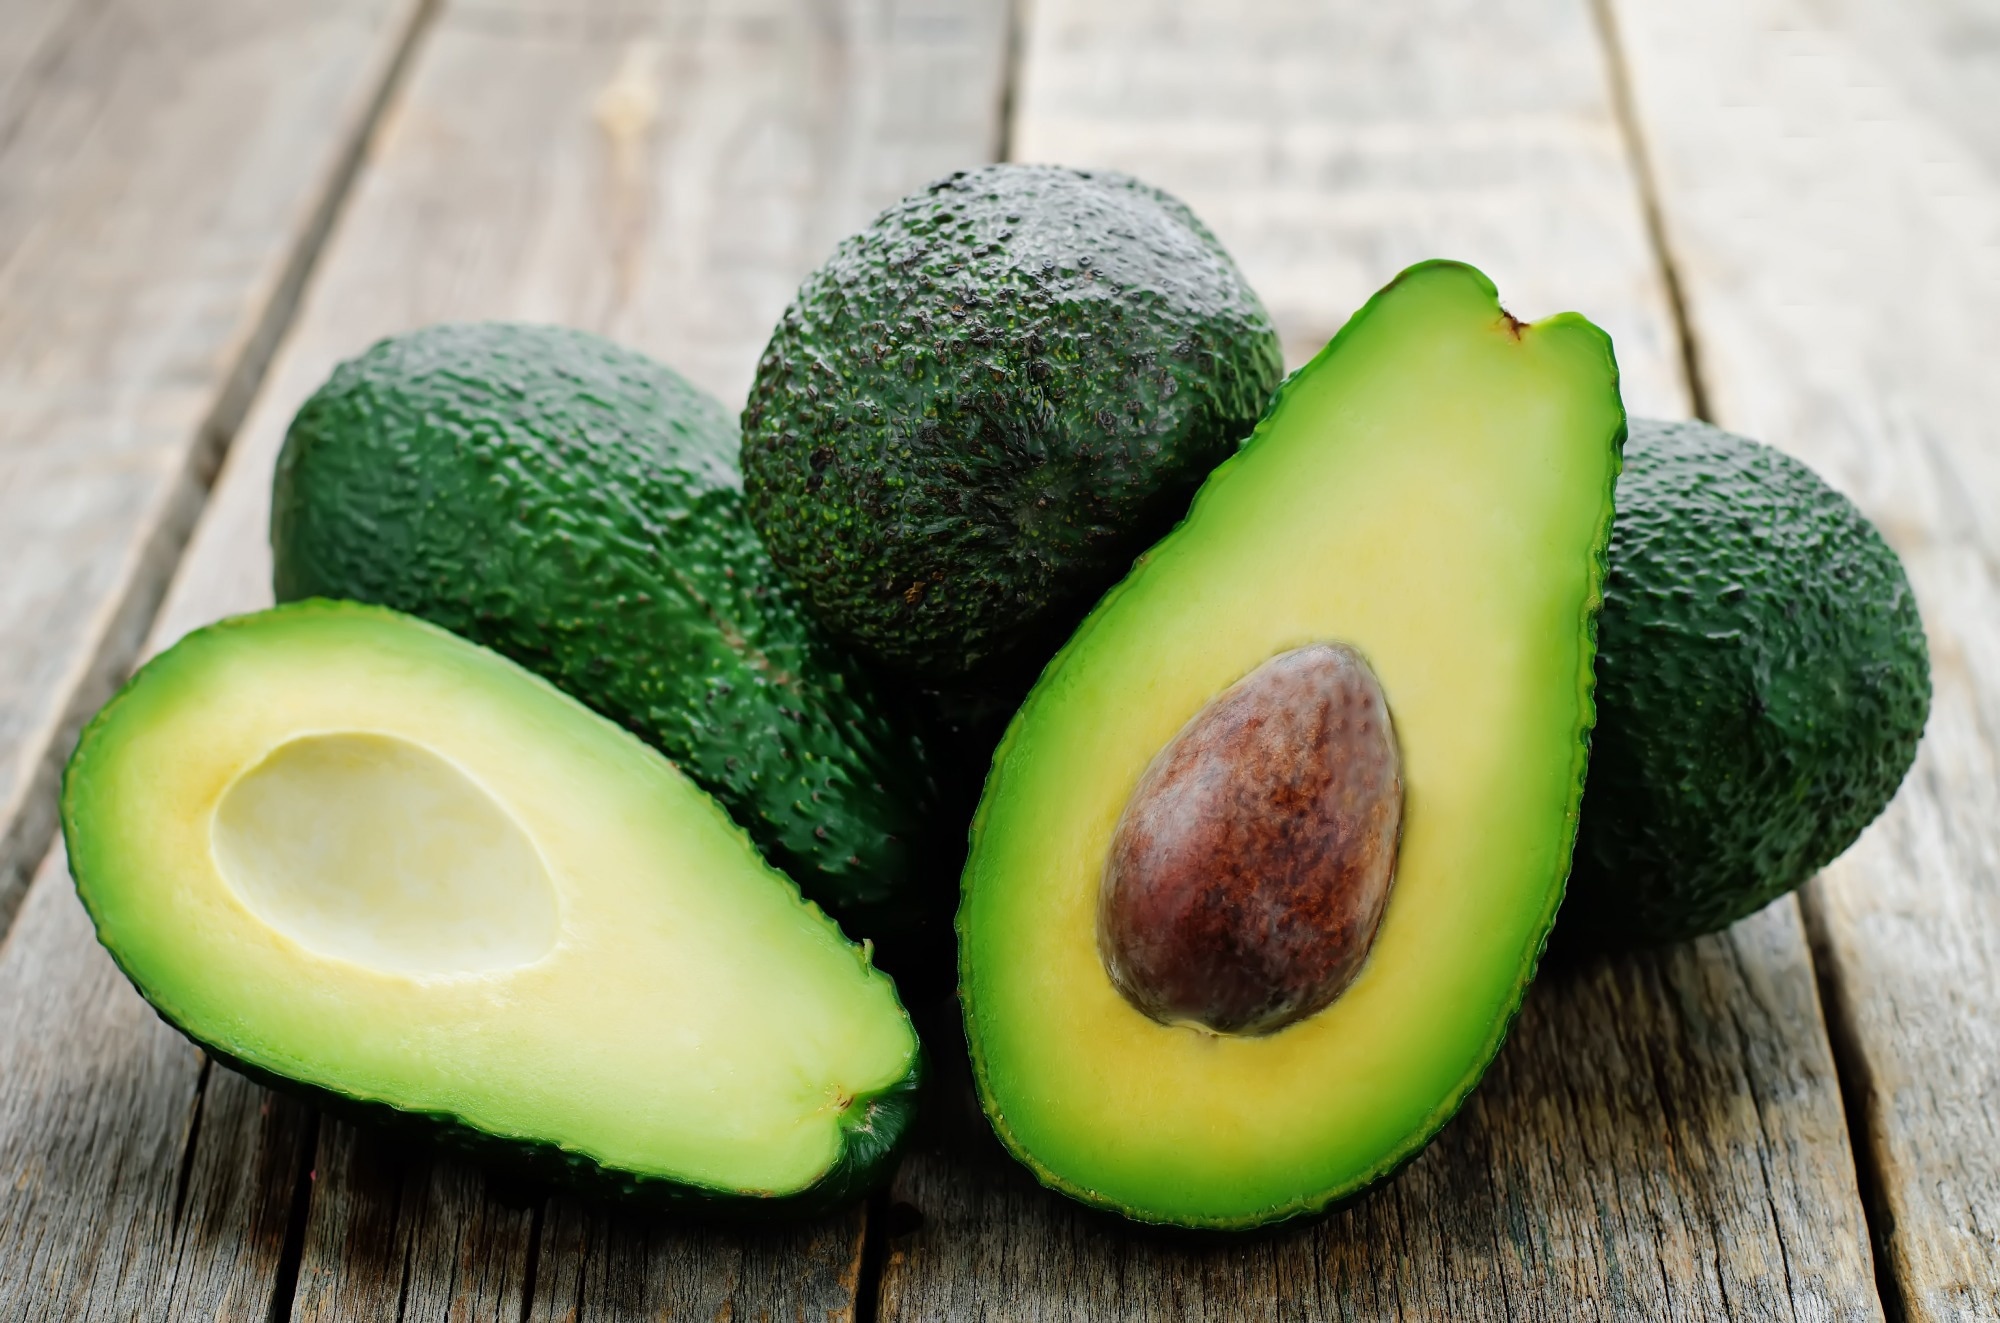 Study: Avocado Consumption and Cardiometabolic Health: A Systematic Review and Meta-Analysis. Image Credit: Nataliya Arzamasova/Shutterstock.com